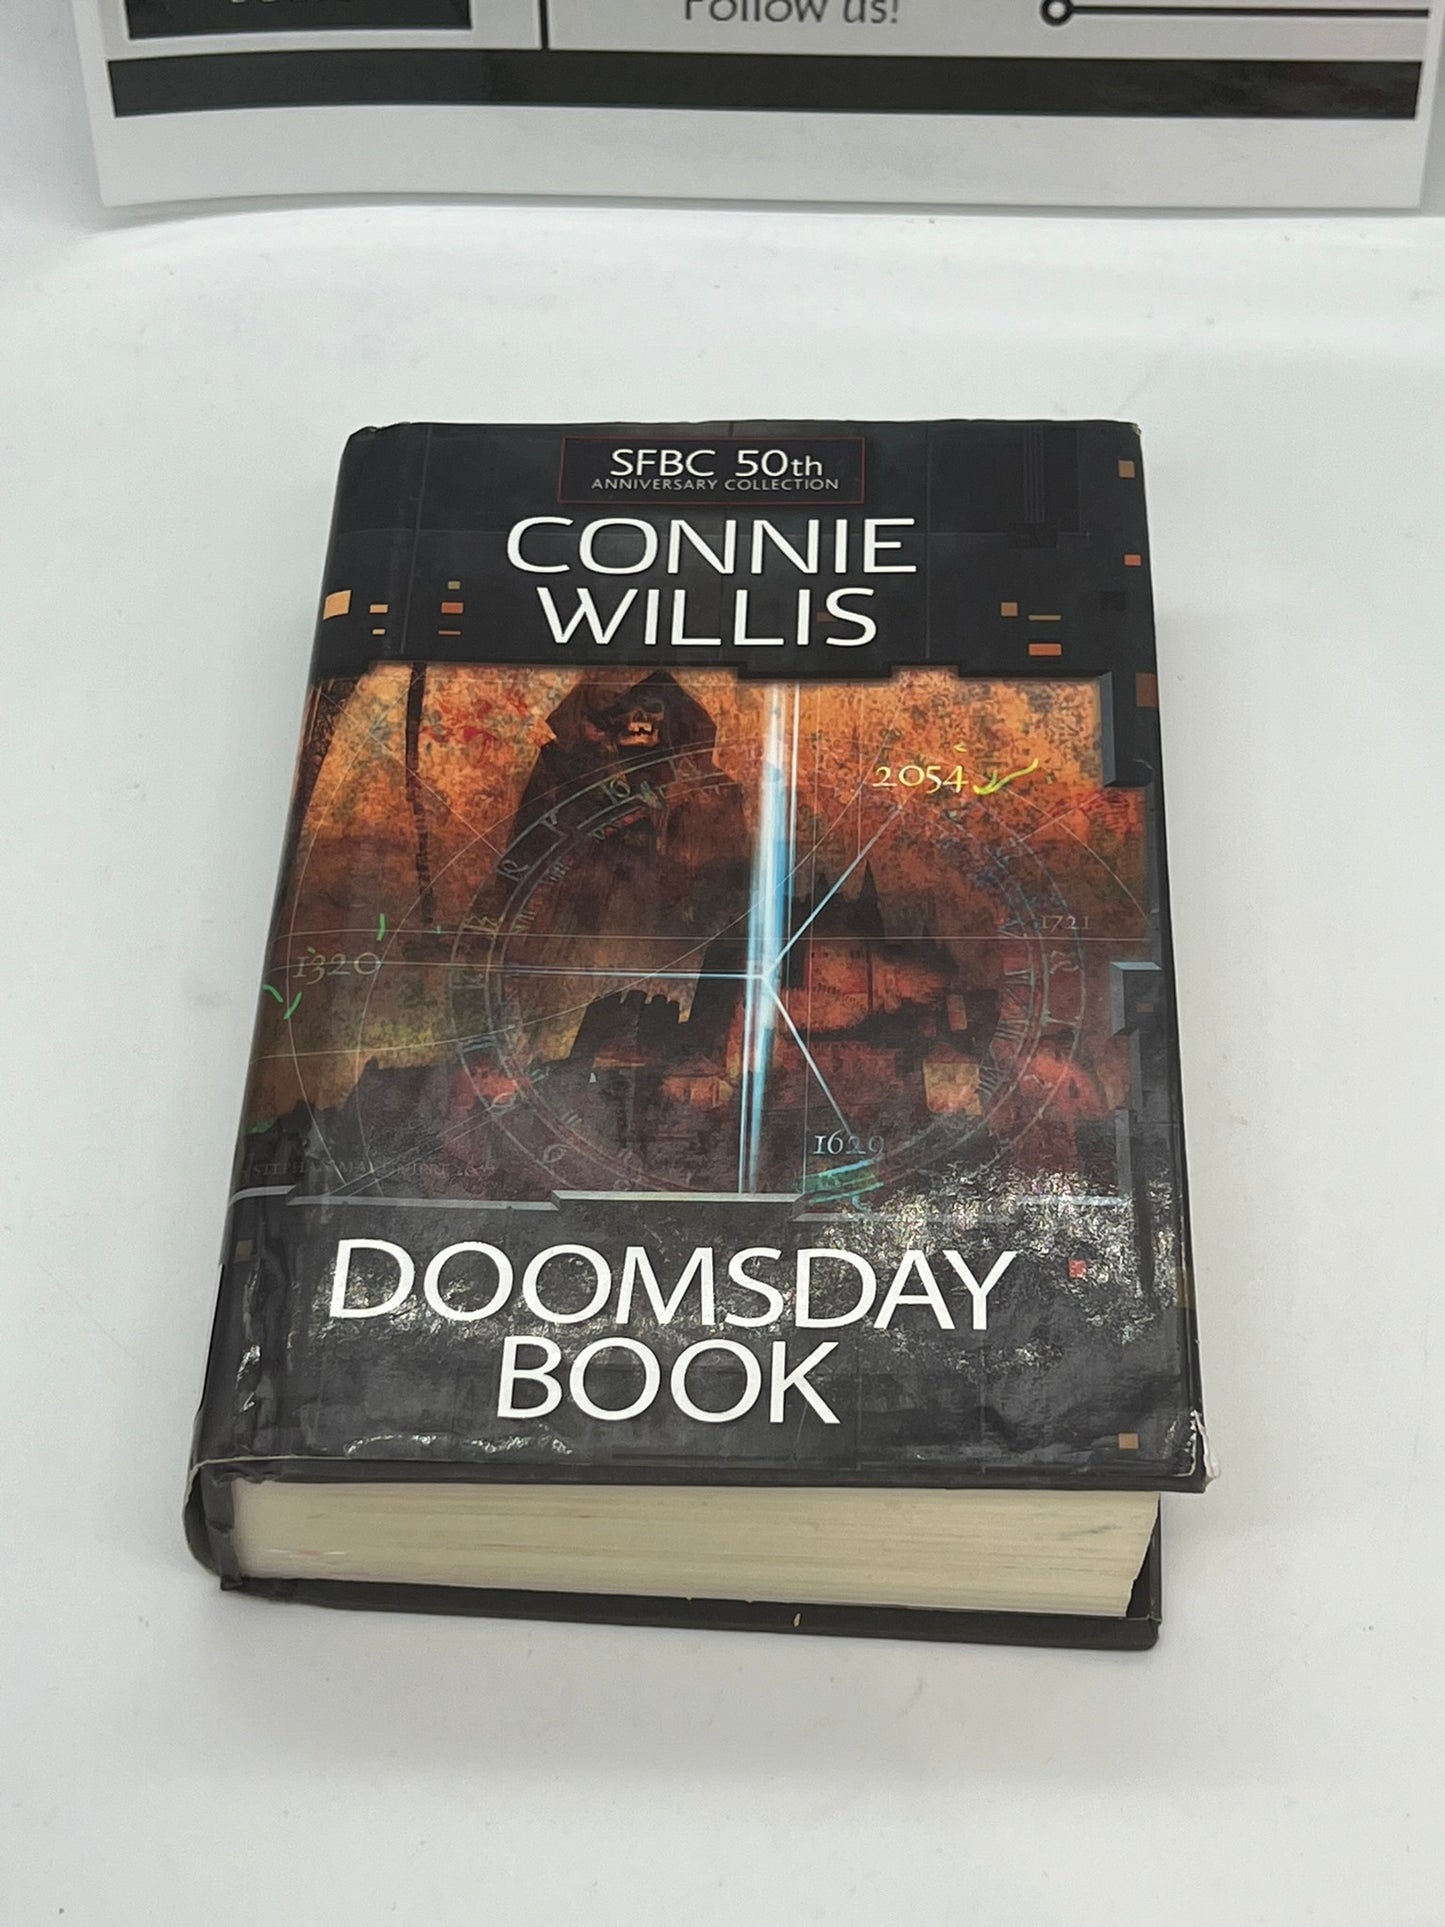 DOOMSDAY BOOK By Connie Willis HC SFBC 50th Anniversary Collection